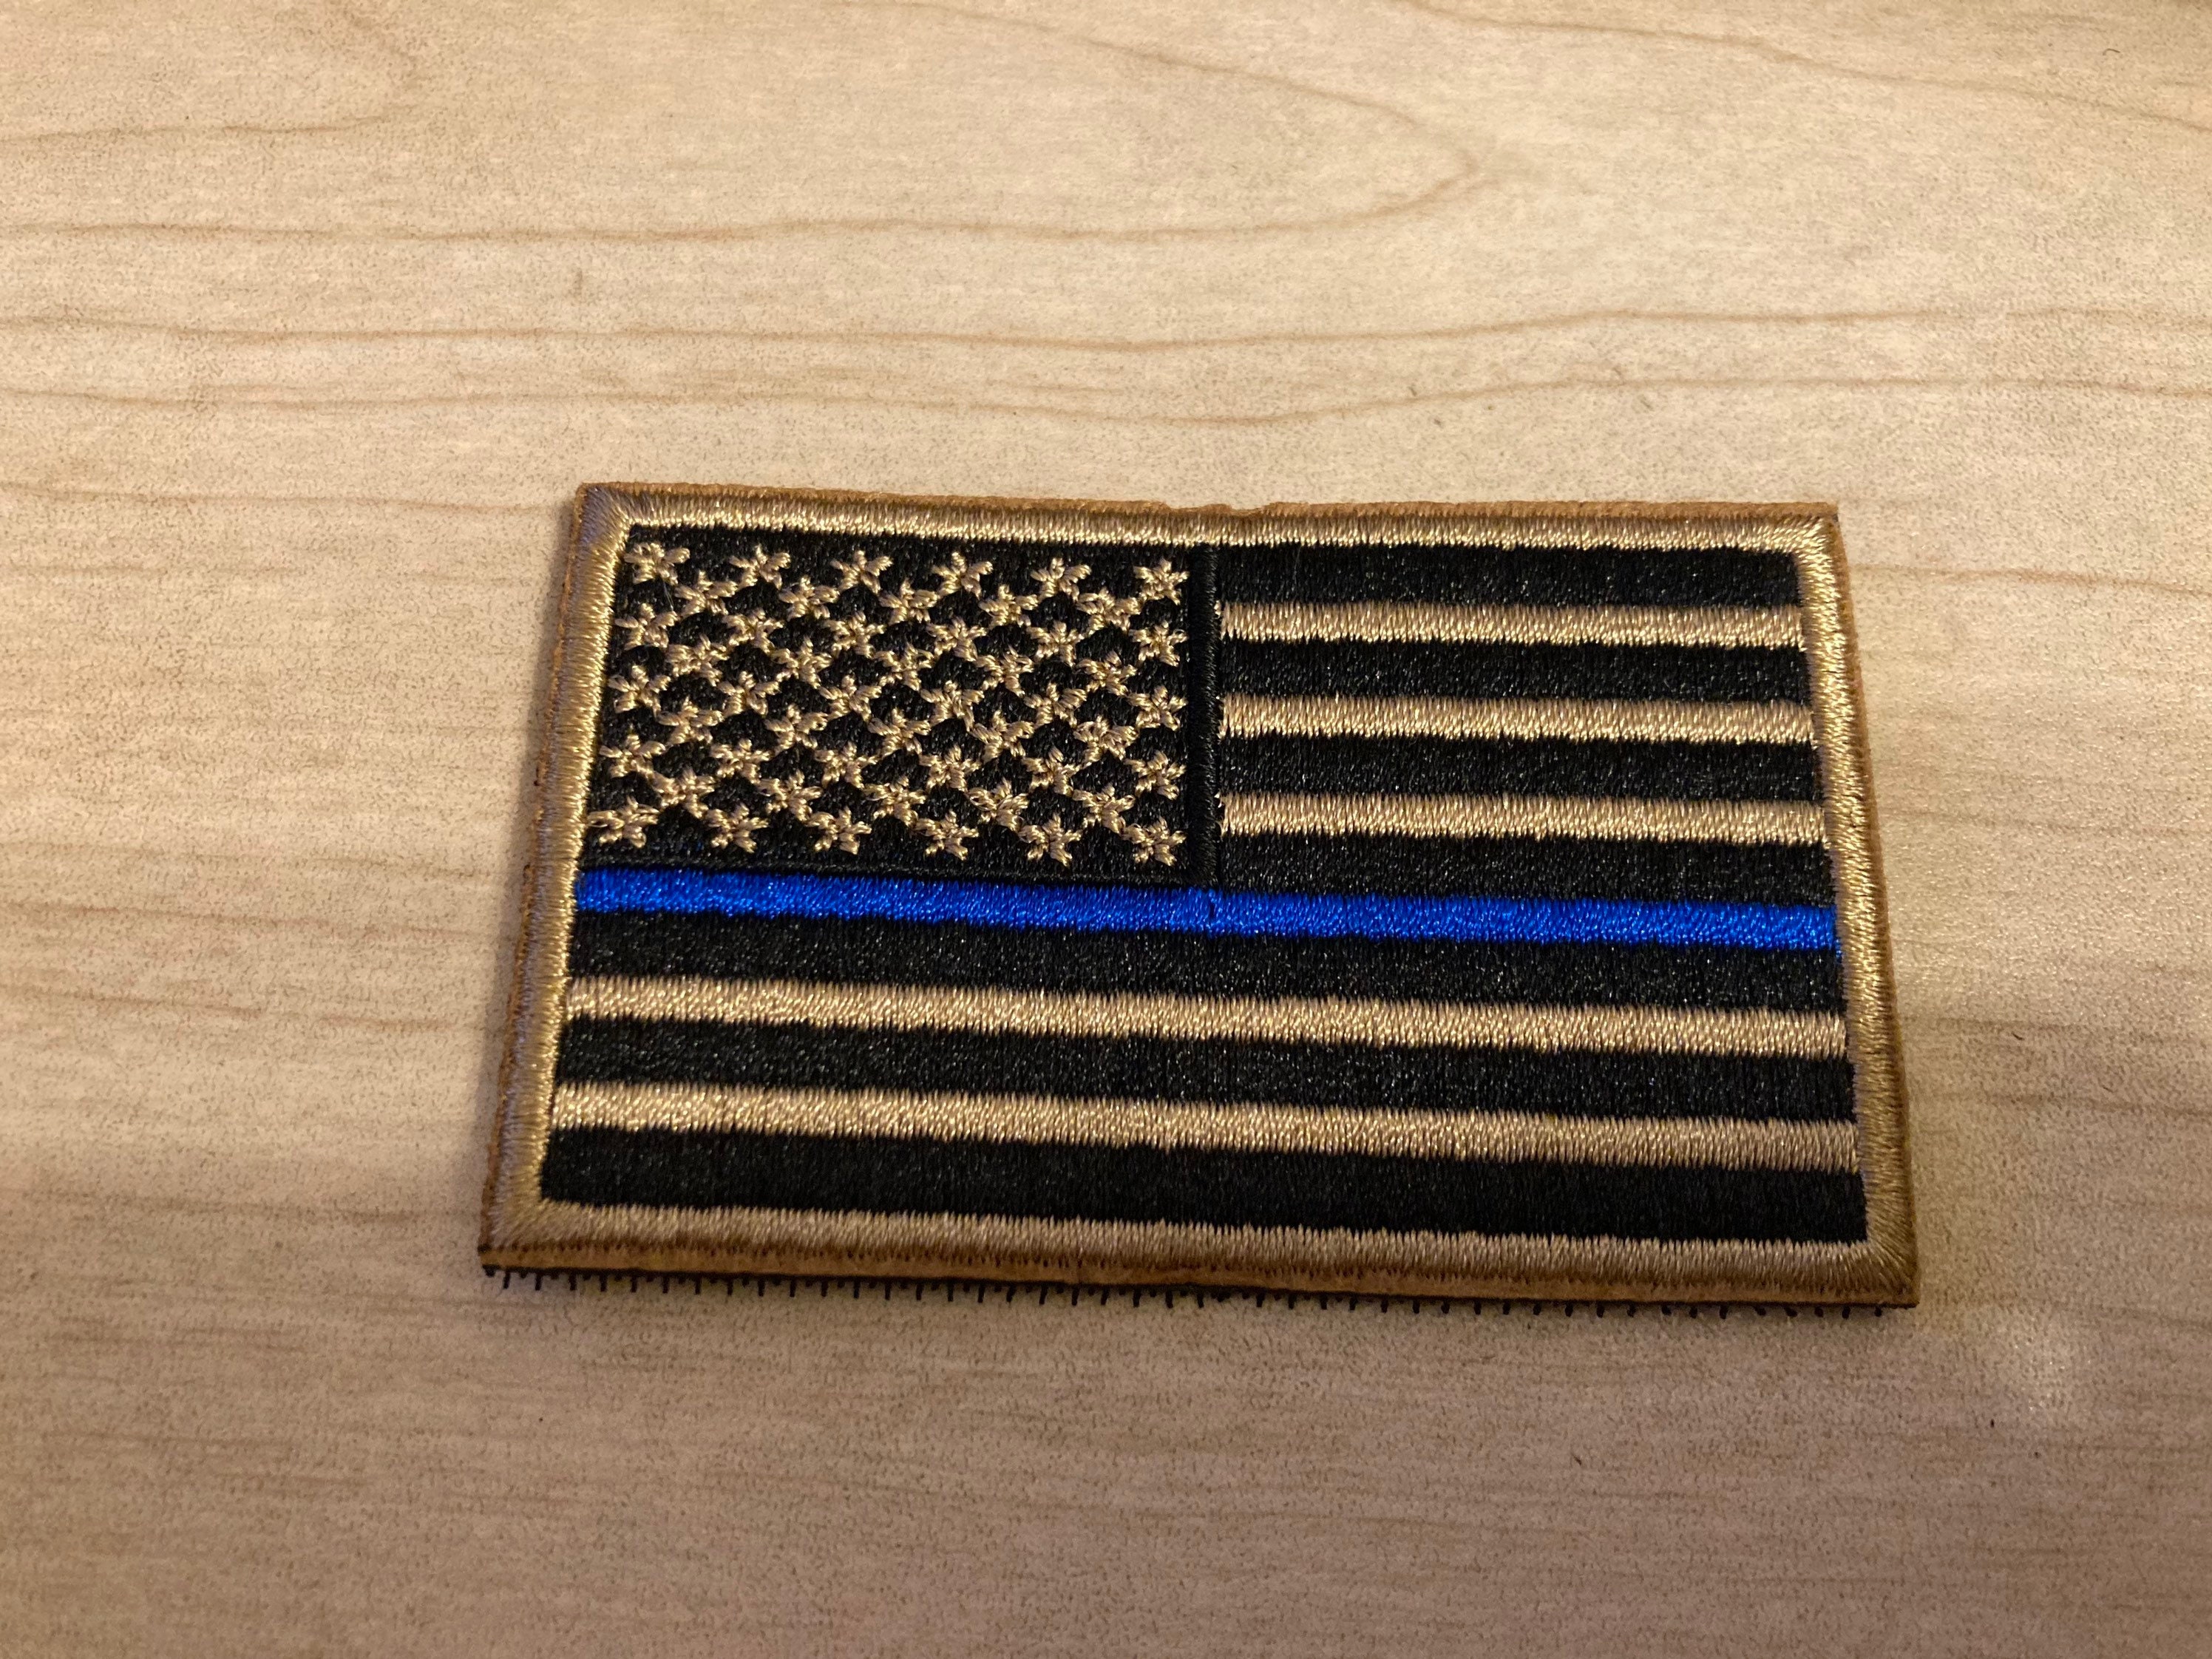 American Flag Blue Line Velcro Patch With Gold Border Free